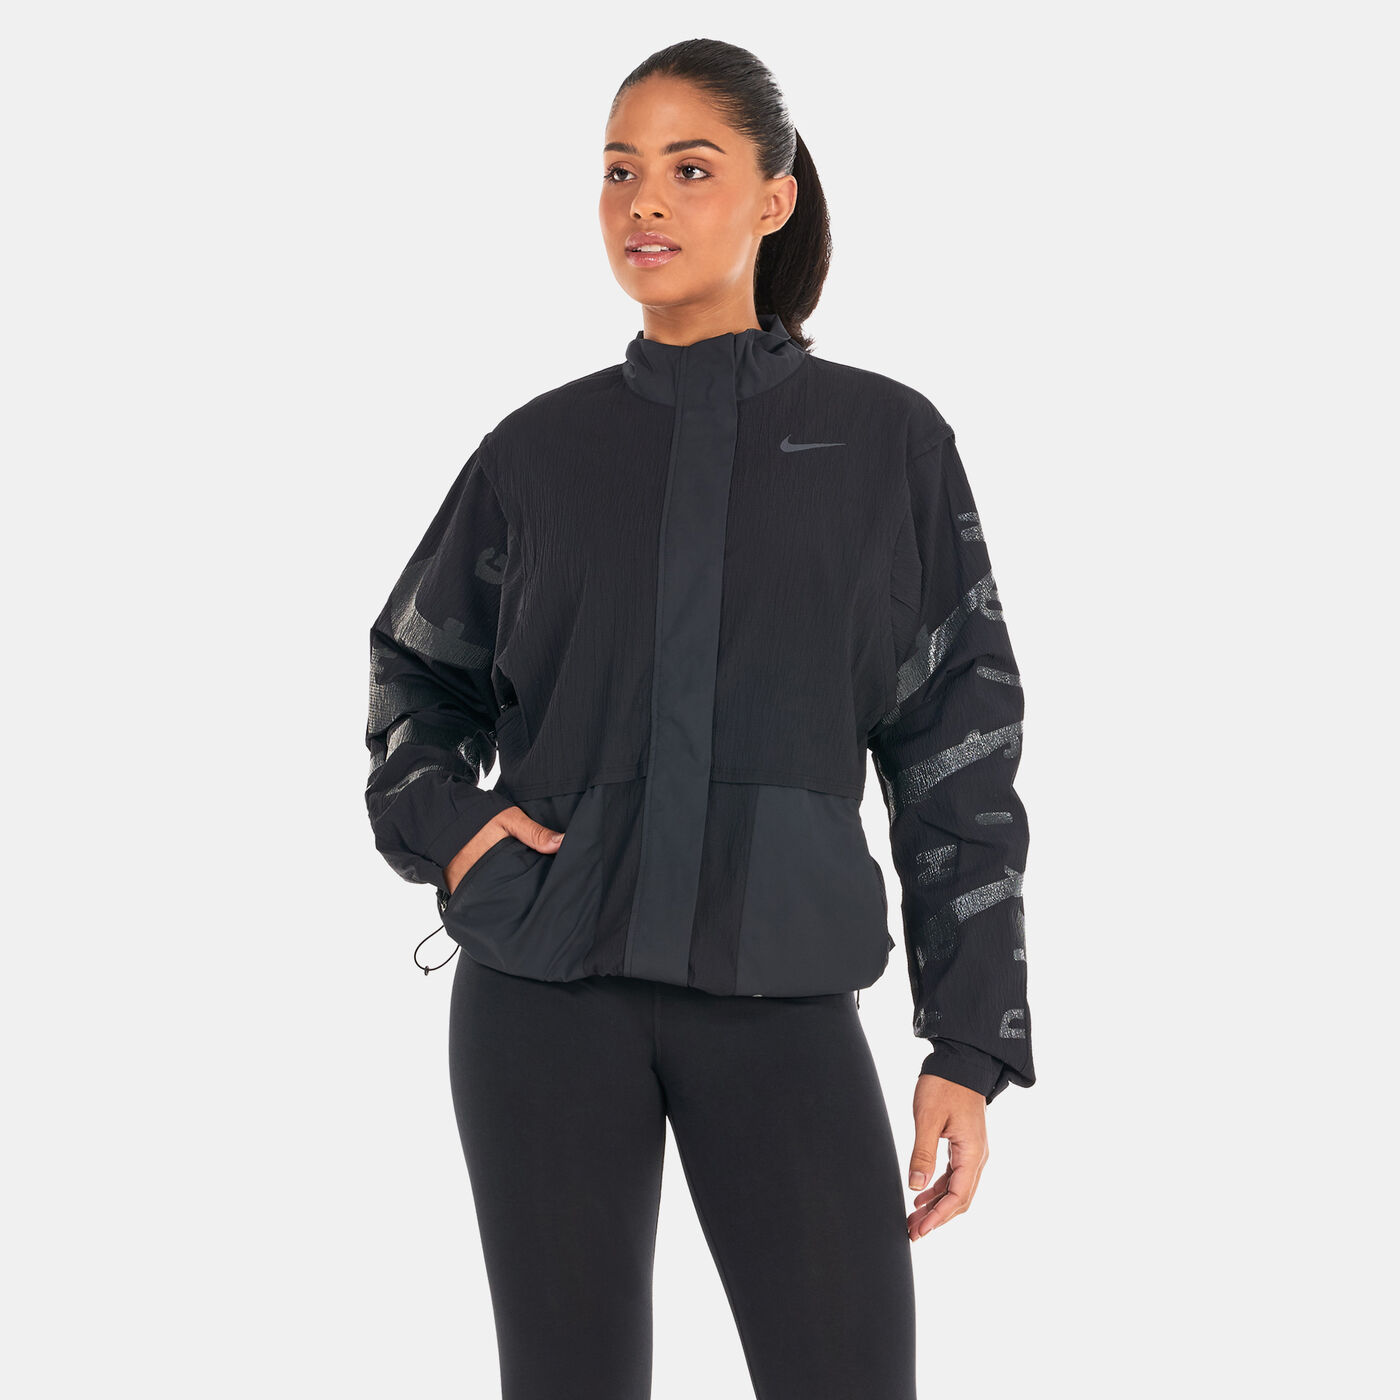 Women's Therma-FIT Run Division Jacket